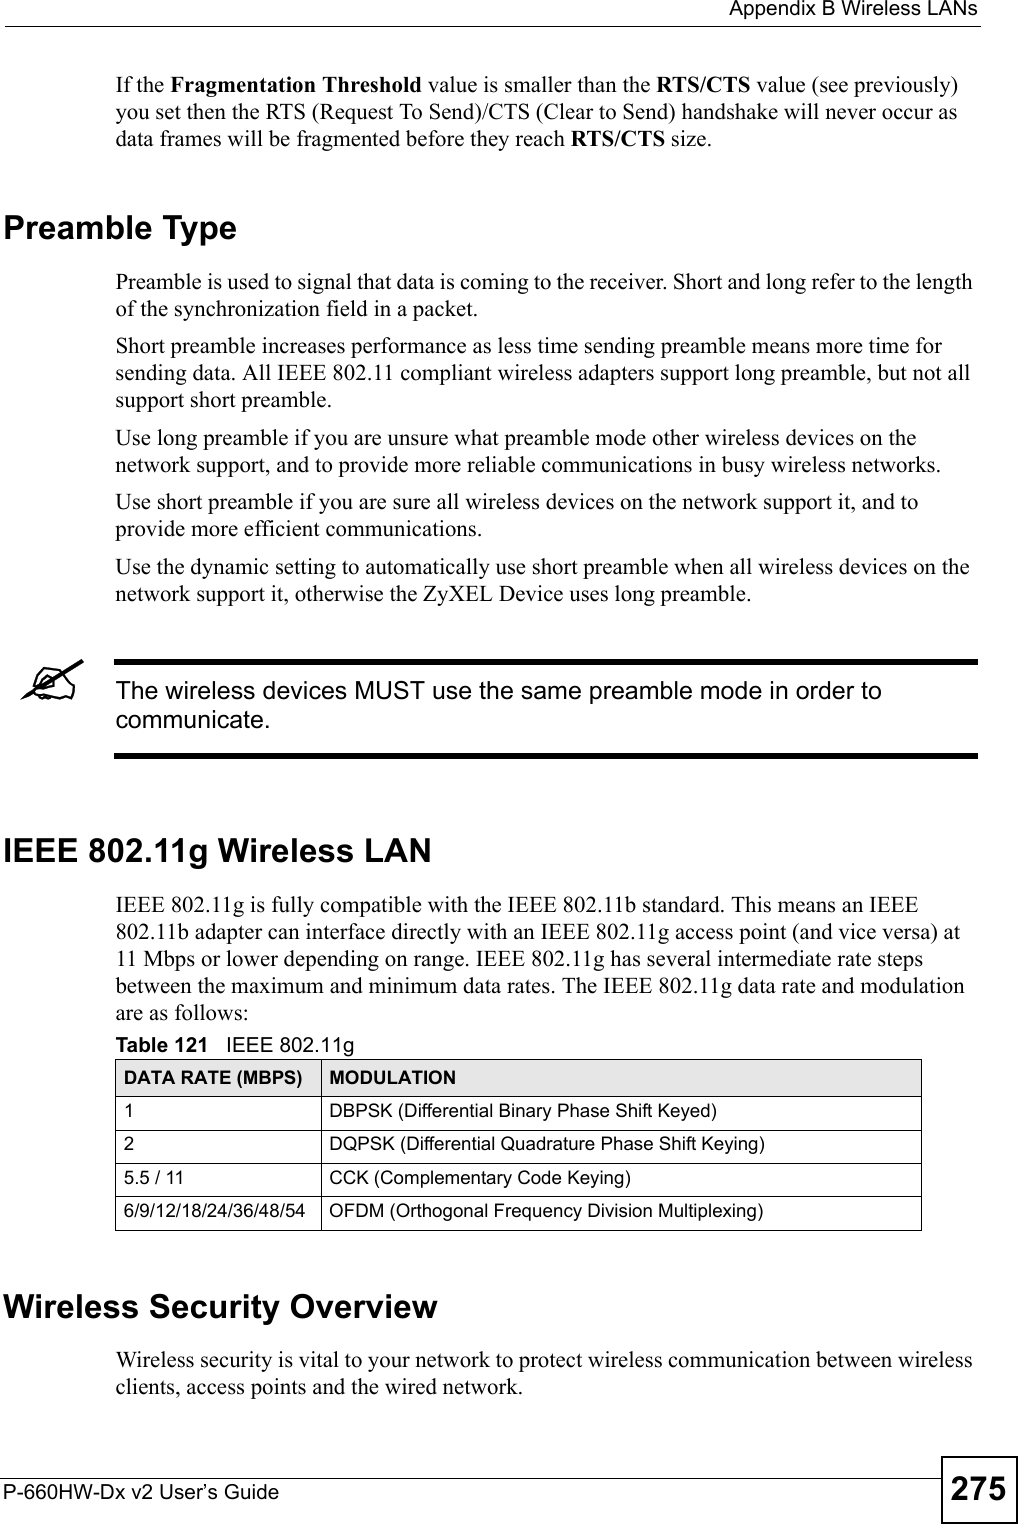  Appendix B Wireless LANsP-660HW-Dx v2 User’s Guide 275If the Fragmentation Threshold value is smaller than the RTS/CTS value (see previously) you set then the RTS (Request To Send)/CTS (Clear to Send) handshake will never occur as data frames will be fragmented before they reach RTS/CTS size.Preamble TypePreamble is used to signal that data is coming to the receiver. Short and long refer to the length of the synchronization field in a packet.Short preamble increases performance as less time sending preamble means more time for sending data. All IEEE 802.11 compliant wireless adapters support long preamble, but not all support short preamble. Use long preamble if you are unsure what preamble mode other wireless devices on the network support, and to provide more reliable communications in busy wireless networks. Use short preamble if you are sure all wireless devices on the network support it, and to provide more efficient communications.Use the dynamic setting to automatically use short preamble when all wireless devices on the network support it, otherwise the ZyXEL Device uses long preamble.&quot;The wireless devices MUST use the same preamble mode in order to communicate.IEEE 802.11g Wireless LANIEEE 802.11g is fully compatible with the IEEE 802.11b standard. This means an IEEE 802.11b adapter can interface directly with an IEEE 802.11g access point (and vice versa) at 11 Mbps or lower depending on range. IEEE 802.11g has several intermediate rate steps between the maximum and minimum data rates. The IEEE 802.11g data rate and modulation are as follows:Wireless Security OverviewWireless security is vital to your network to protect wireless communication between wireless clients, access points and the wired network.Table 121   IEEE 802.11gDATA RATE (MBPS) MODULATION1 DBPSK (Differential Binary Phase Shift Keyed)2 DQPSK (Differential Quadrature Phase Shift Keying)5.5 / 11 CCK (Complementary Code Keying) 6/9/12/18/24/36/48/54 OFDM (Orthogonal Frequency Division Multiplexing) 